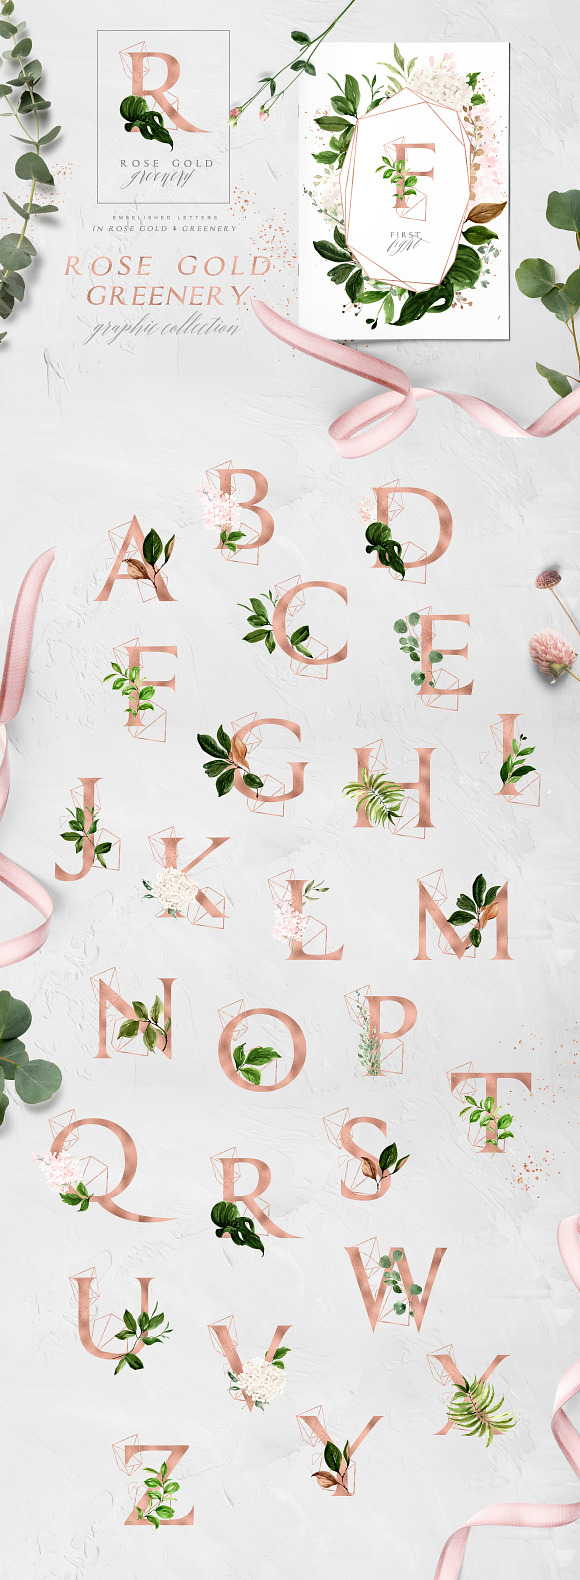 Rose Gold & Greenery Geometric Set in Illustrations - product preview 1